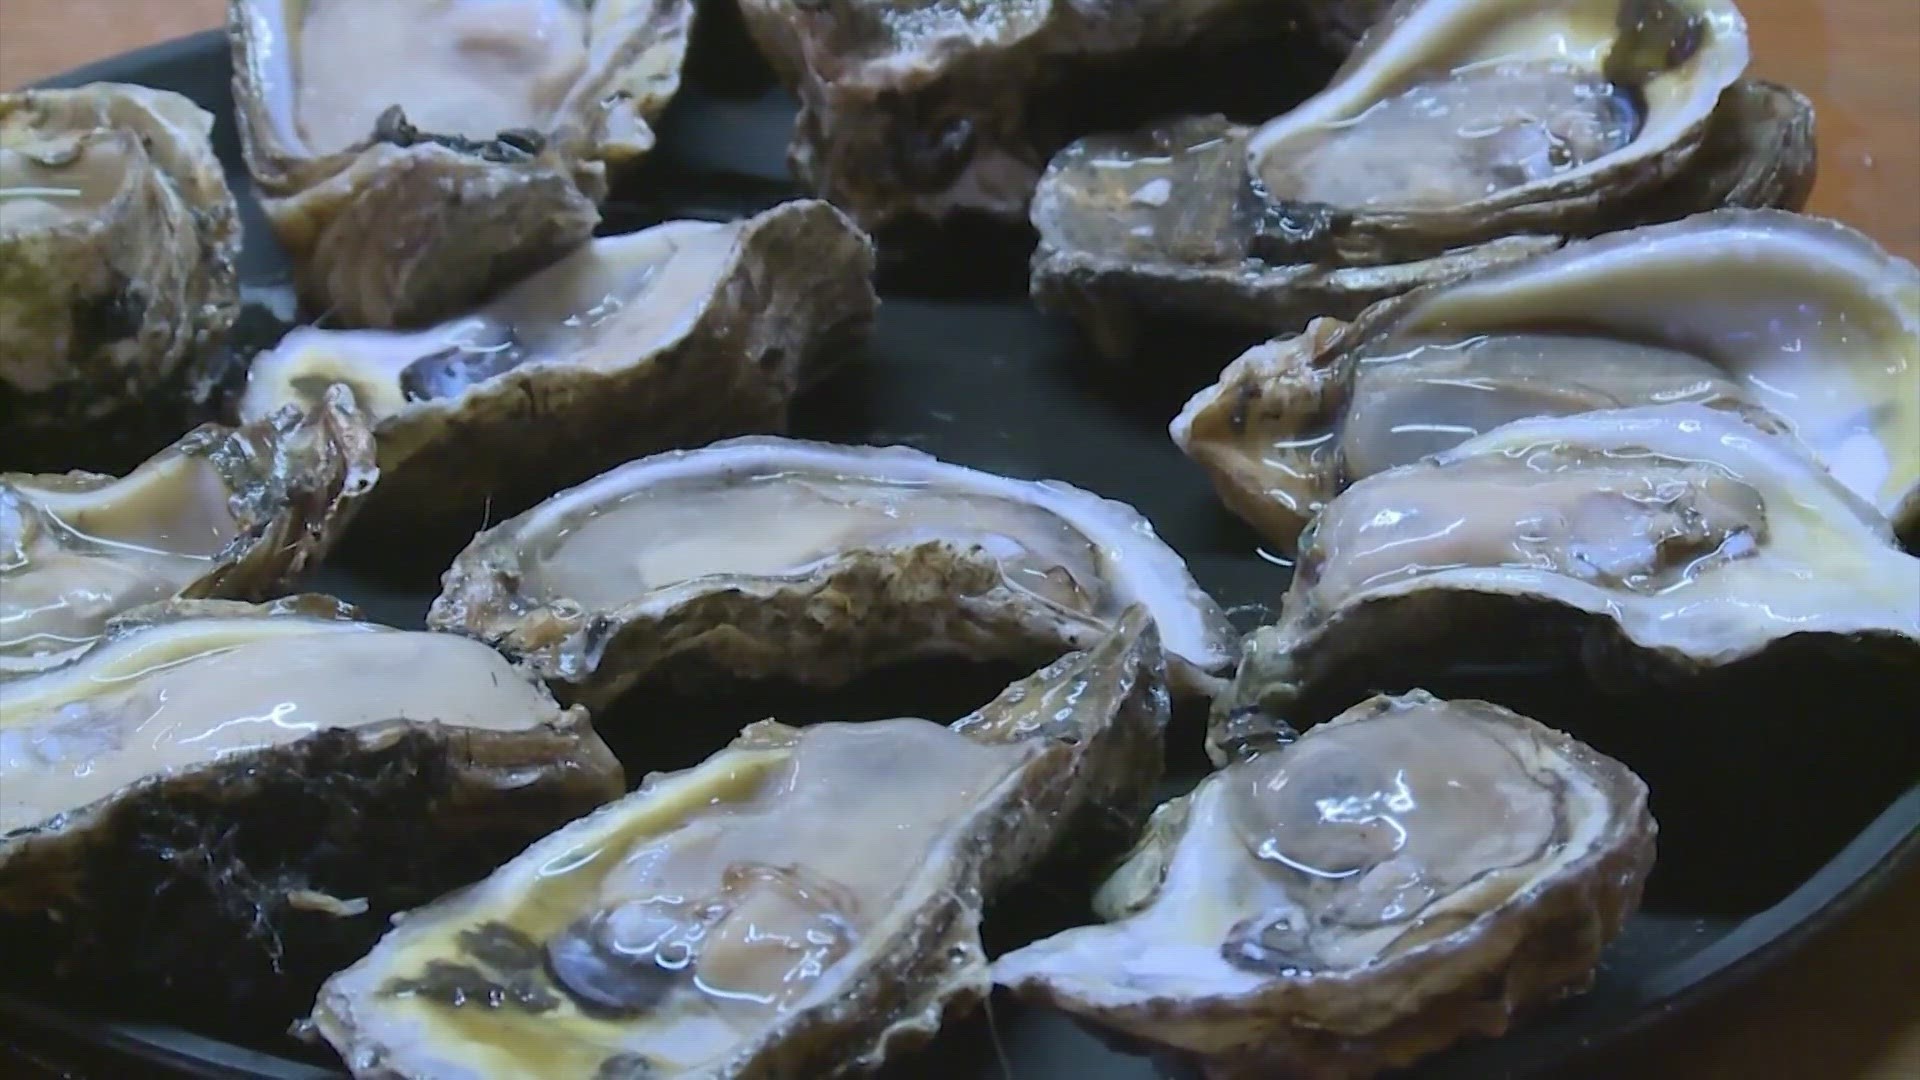 Health officials confirm the man died from the raw oysters.  He did have underlying health conditions.